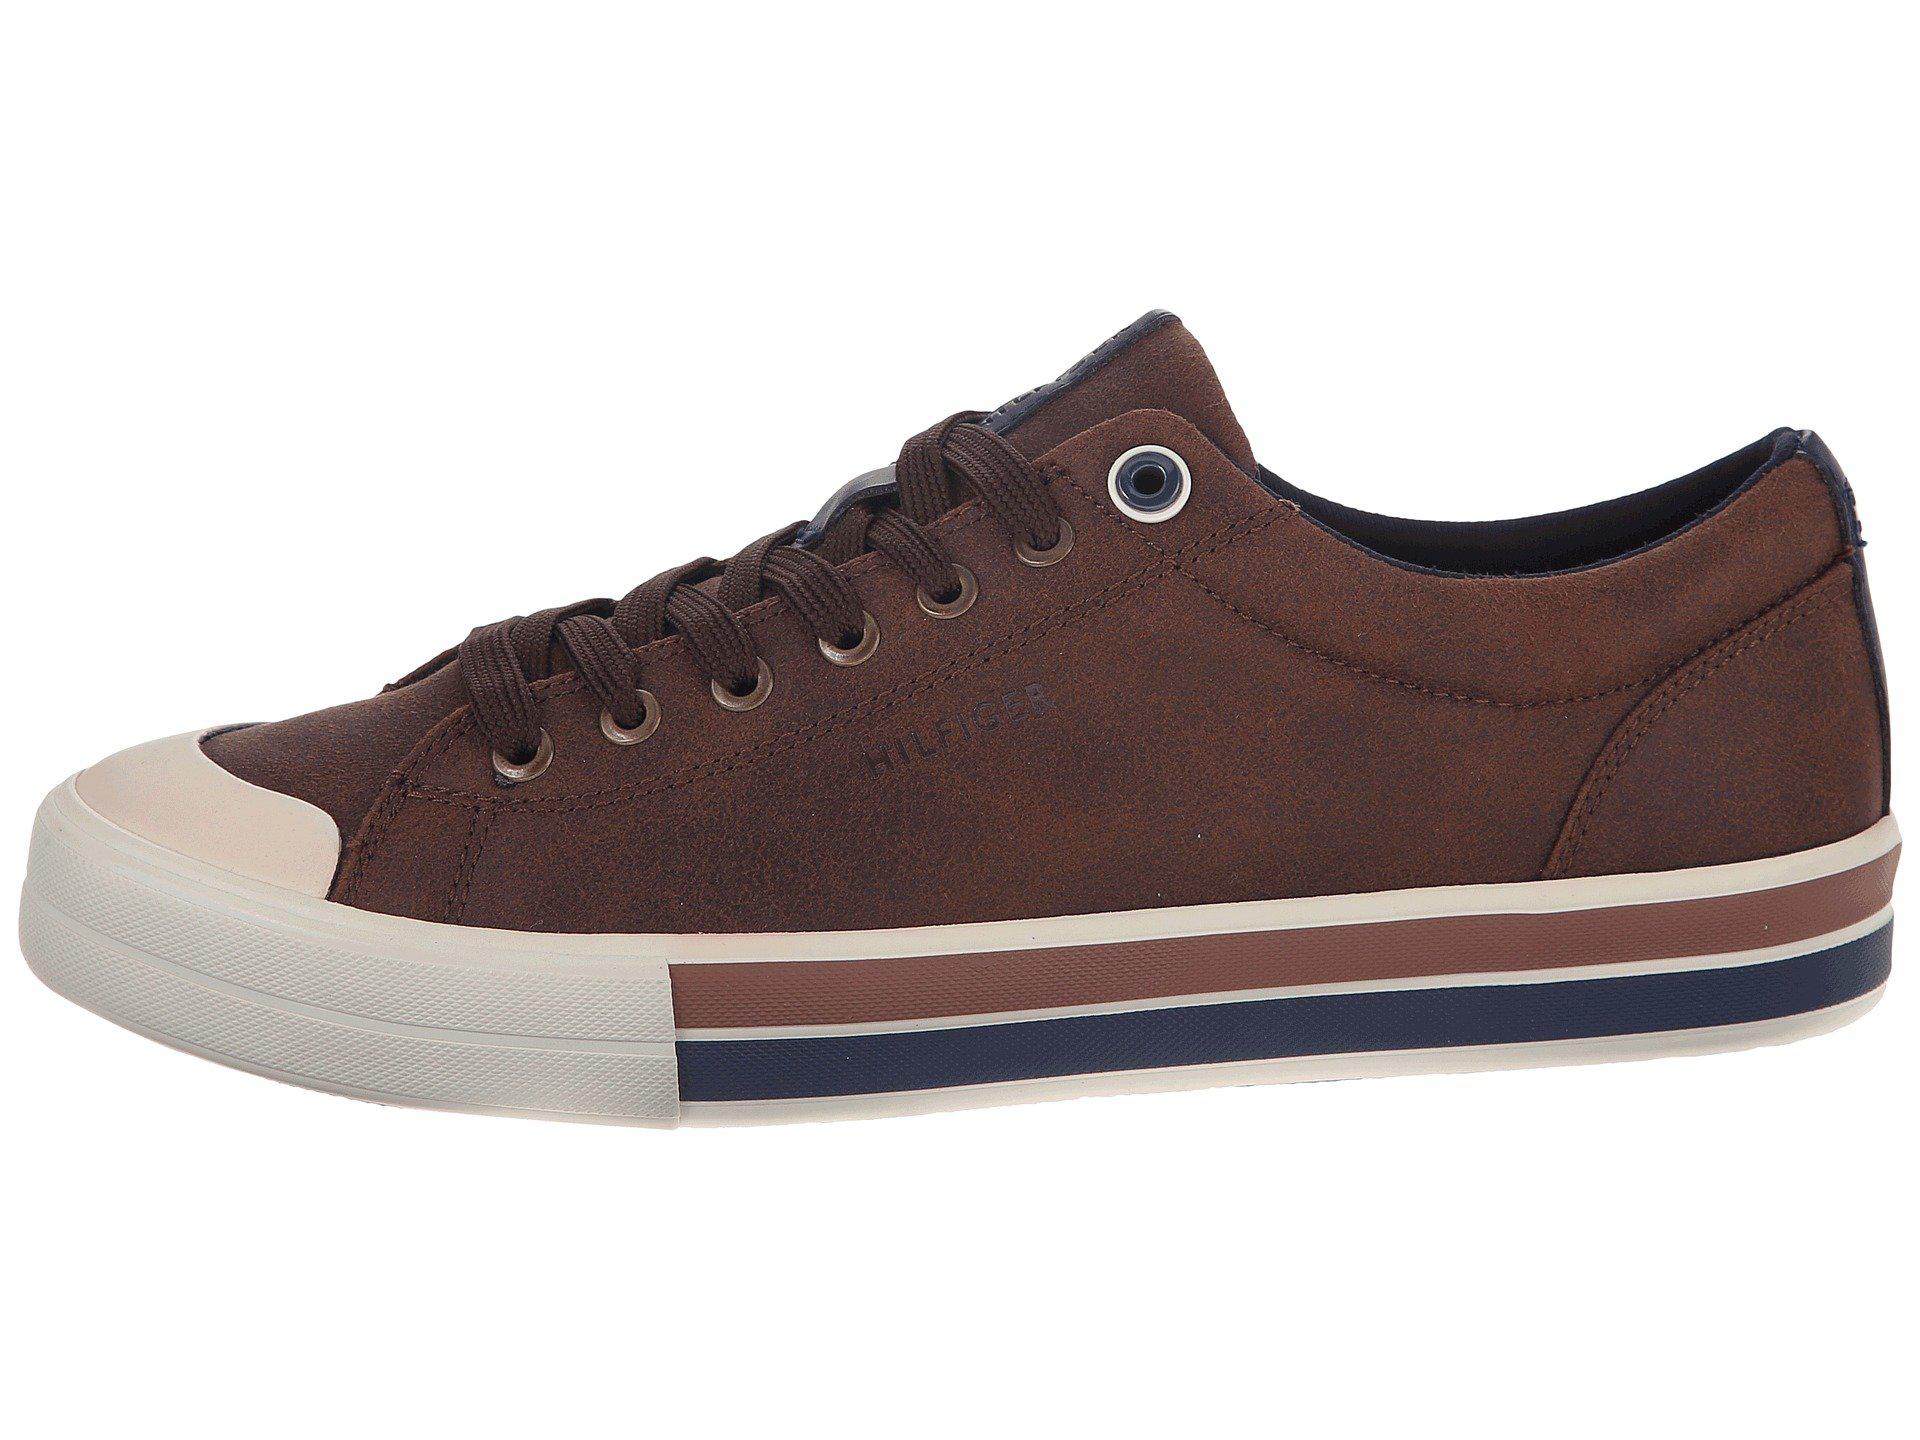 Tommy Hilfiger Canvas Reno Oxford for 